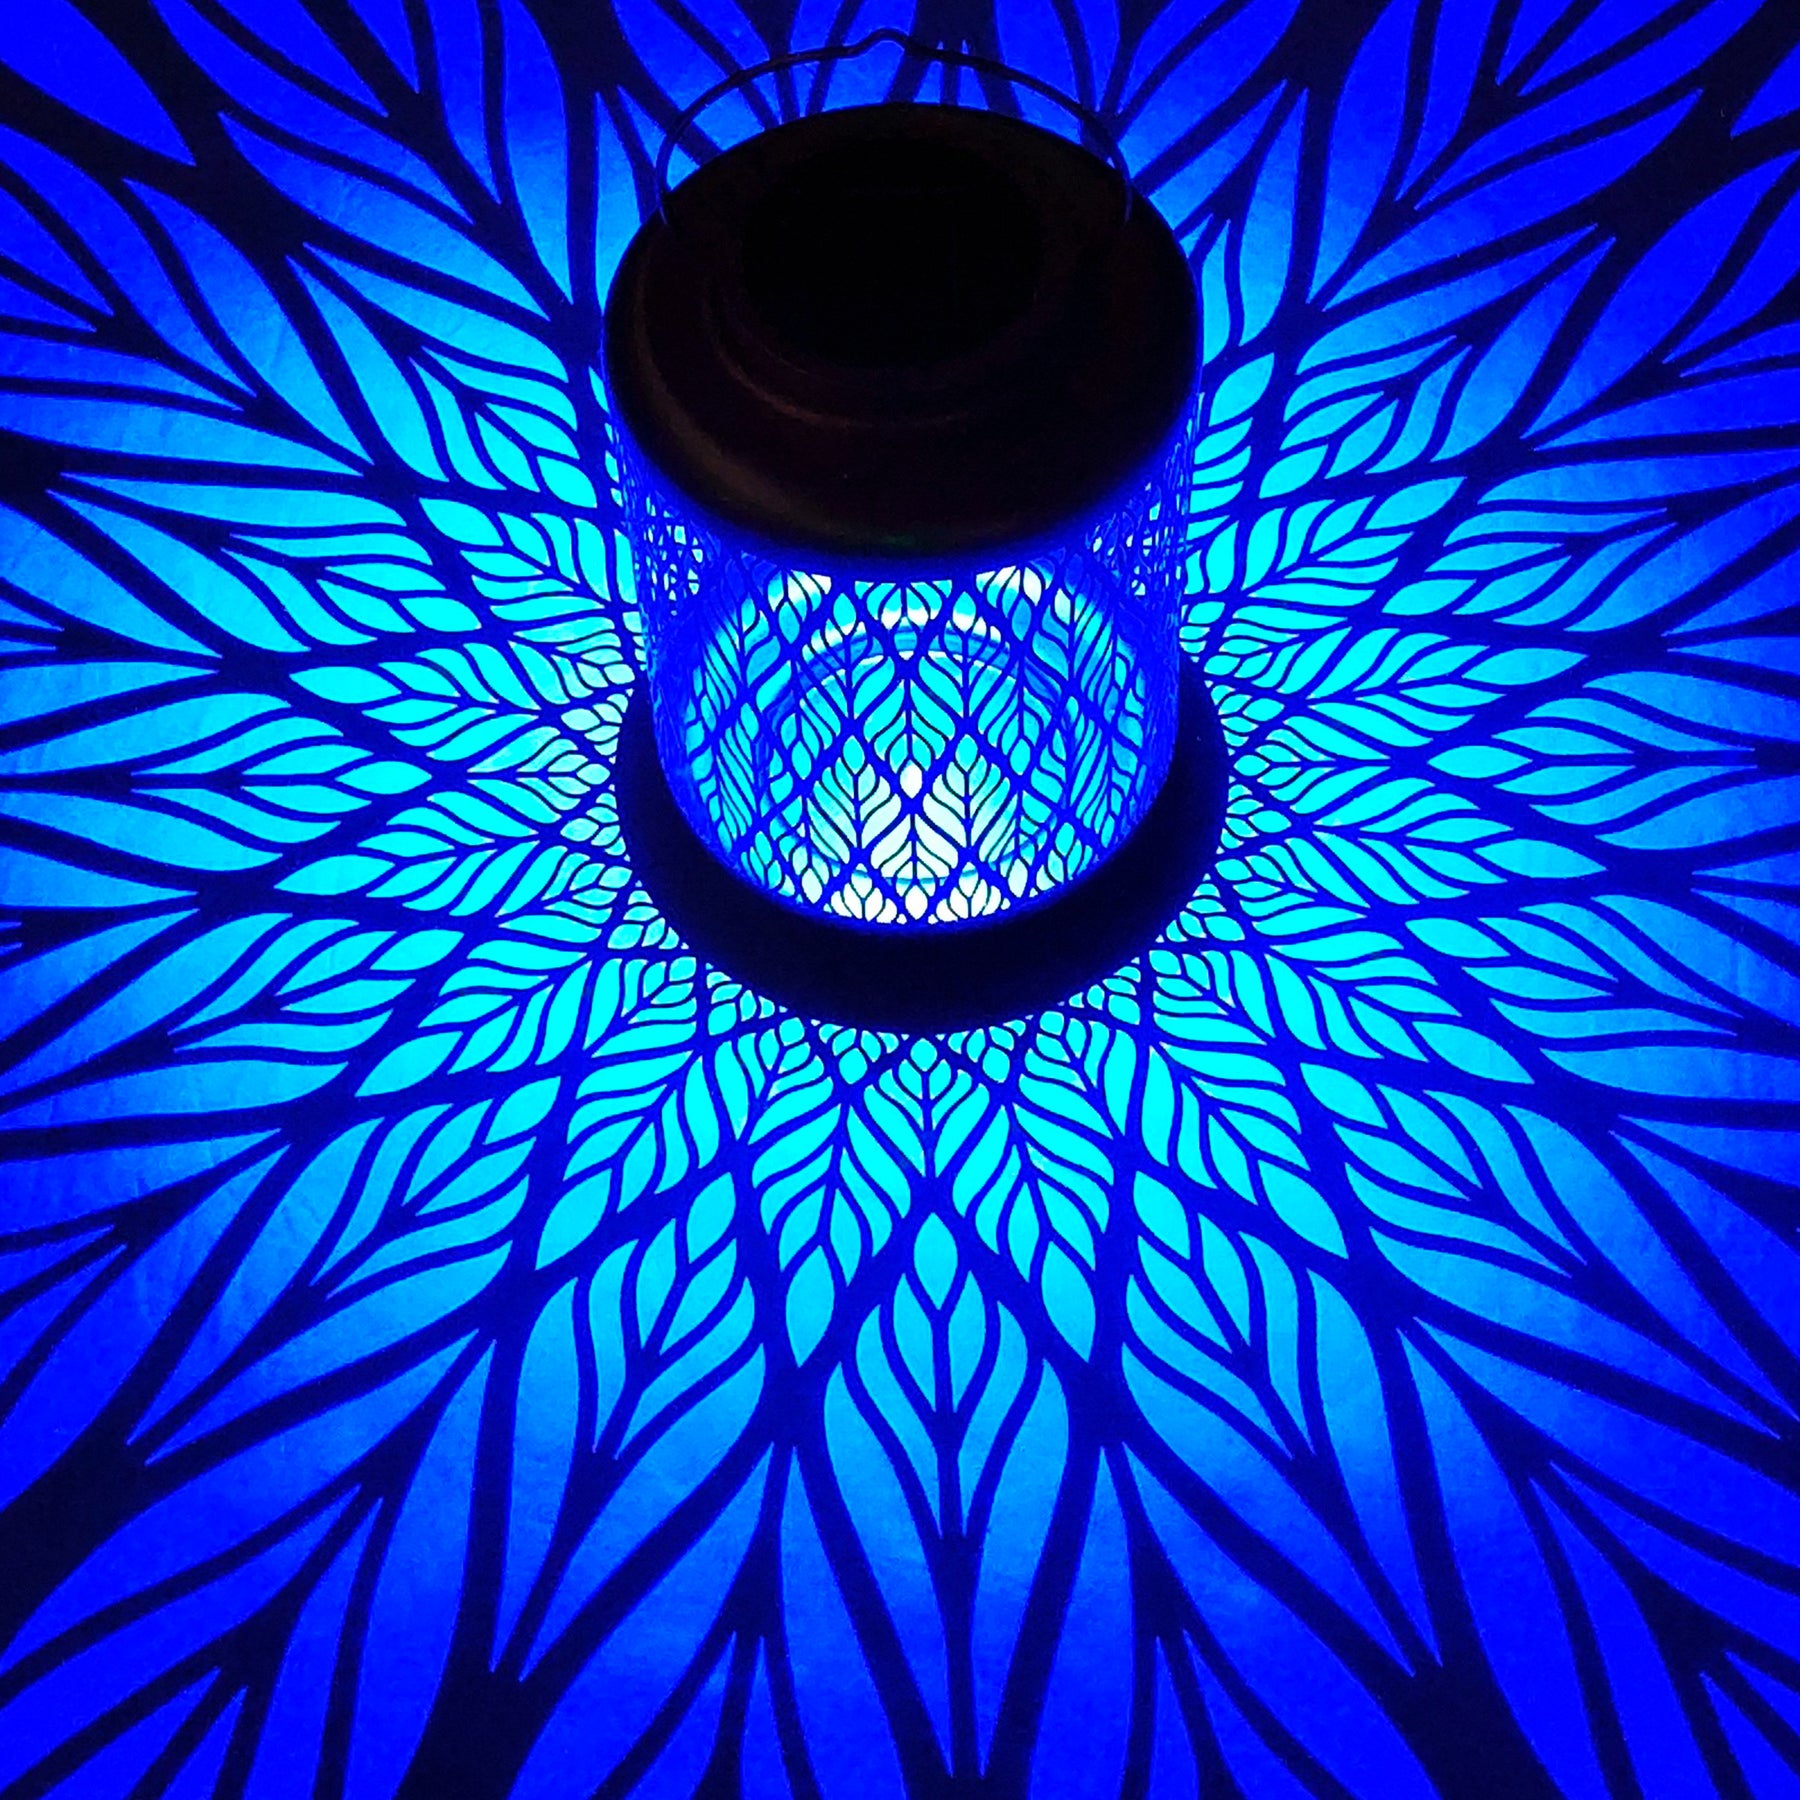 Bliss Outdoors 12-inch Tall Hanging and Tabletop Decorative Solar LED Lantern with Unique Diamond Leaf Design turned on and creating a cool pattern of blue light on the surface around it.